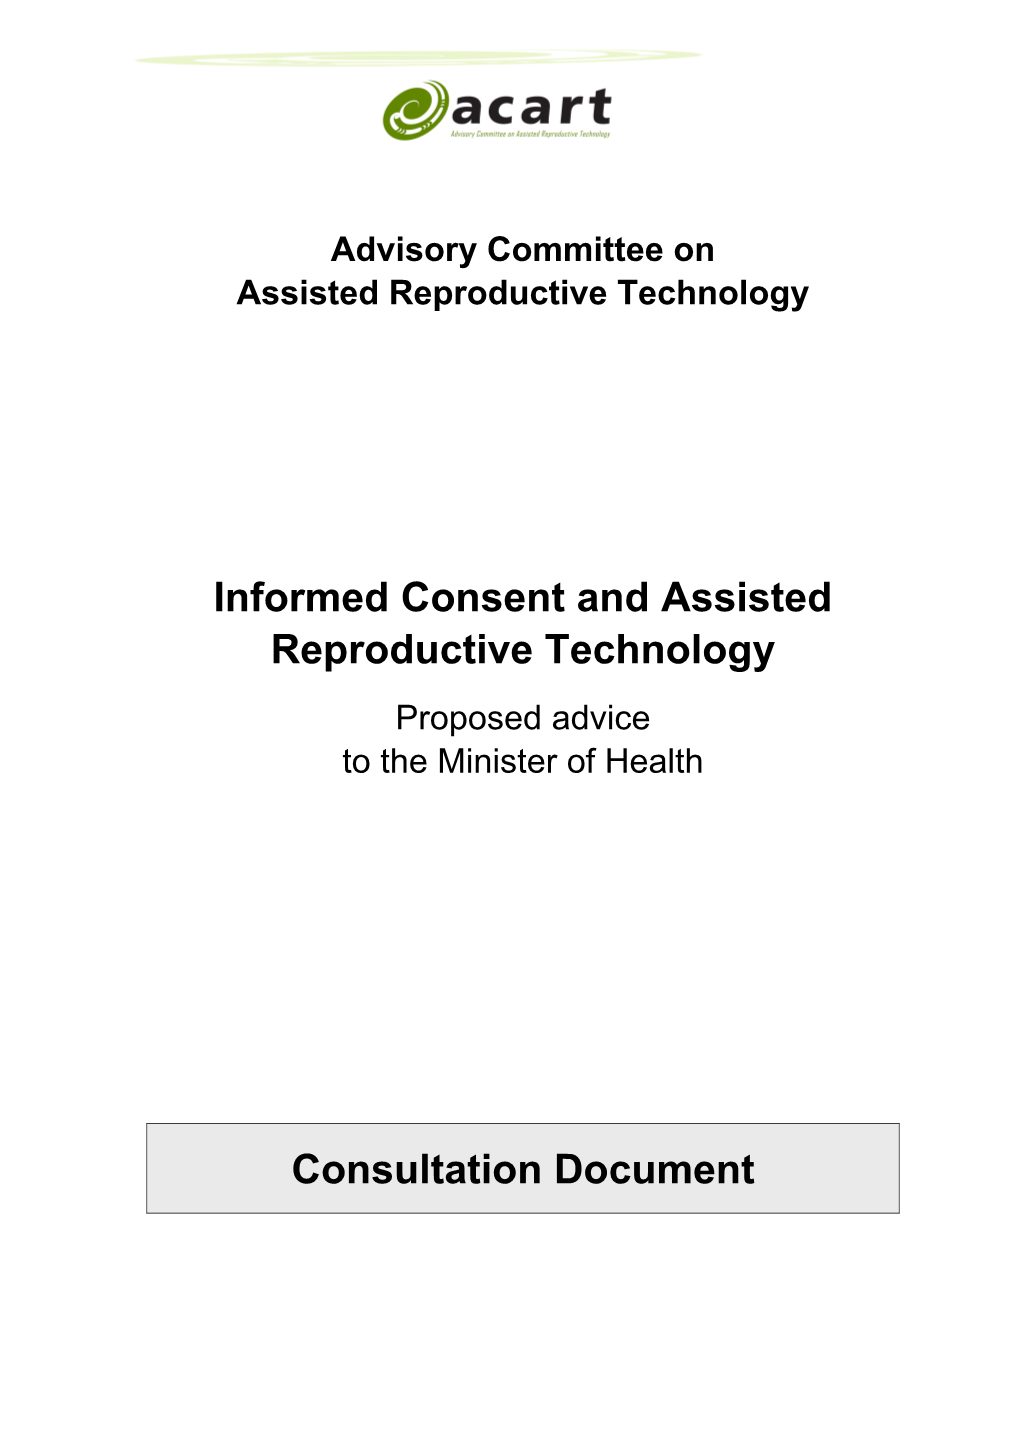 Informed Consent and Assisted Reproductive Technology Proposed Advice to the Minister Of